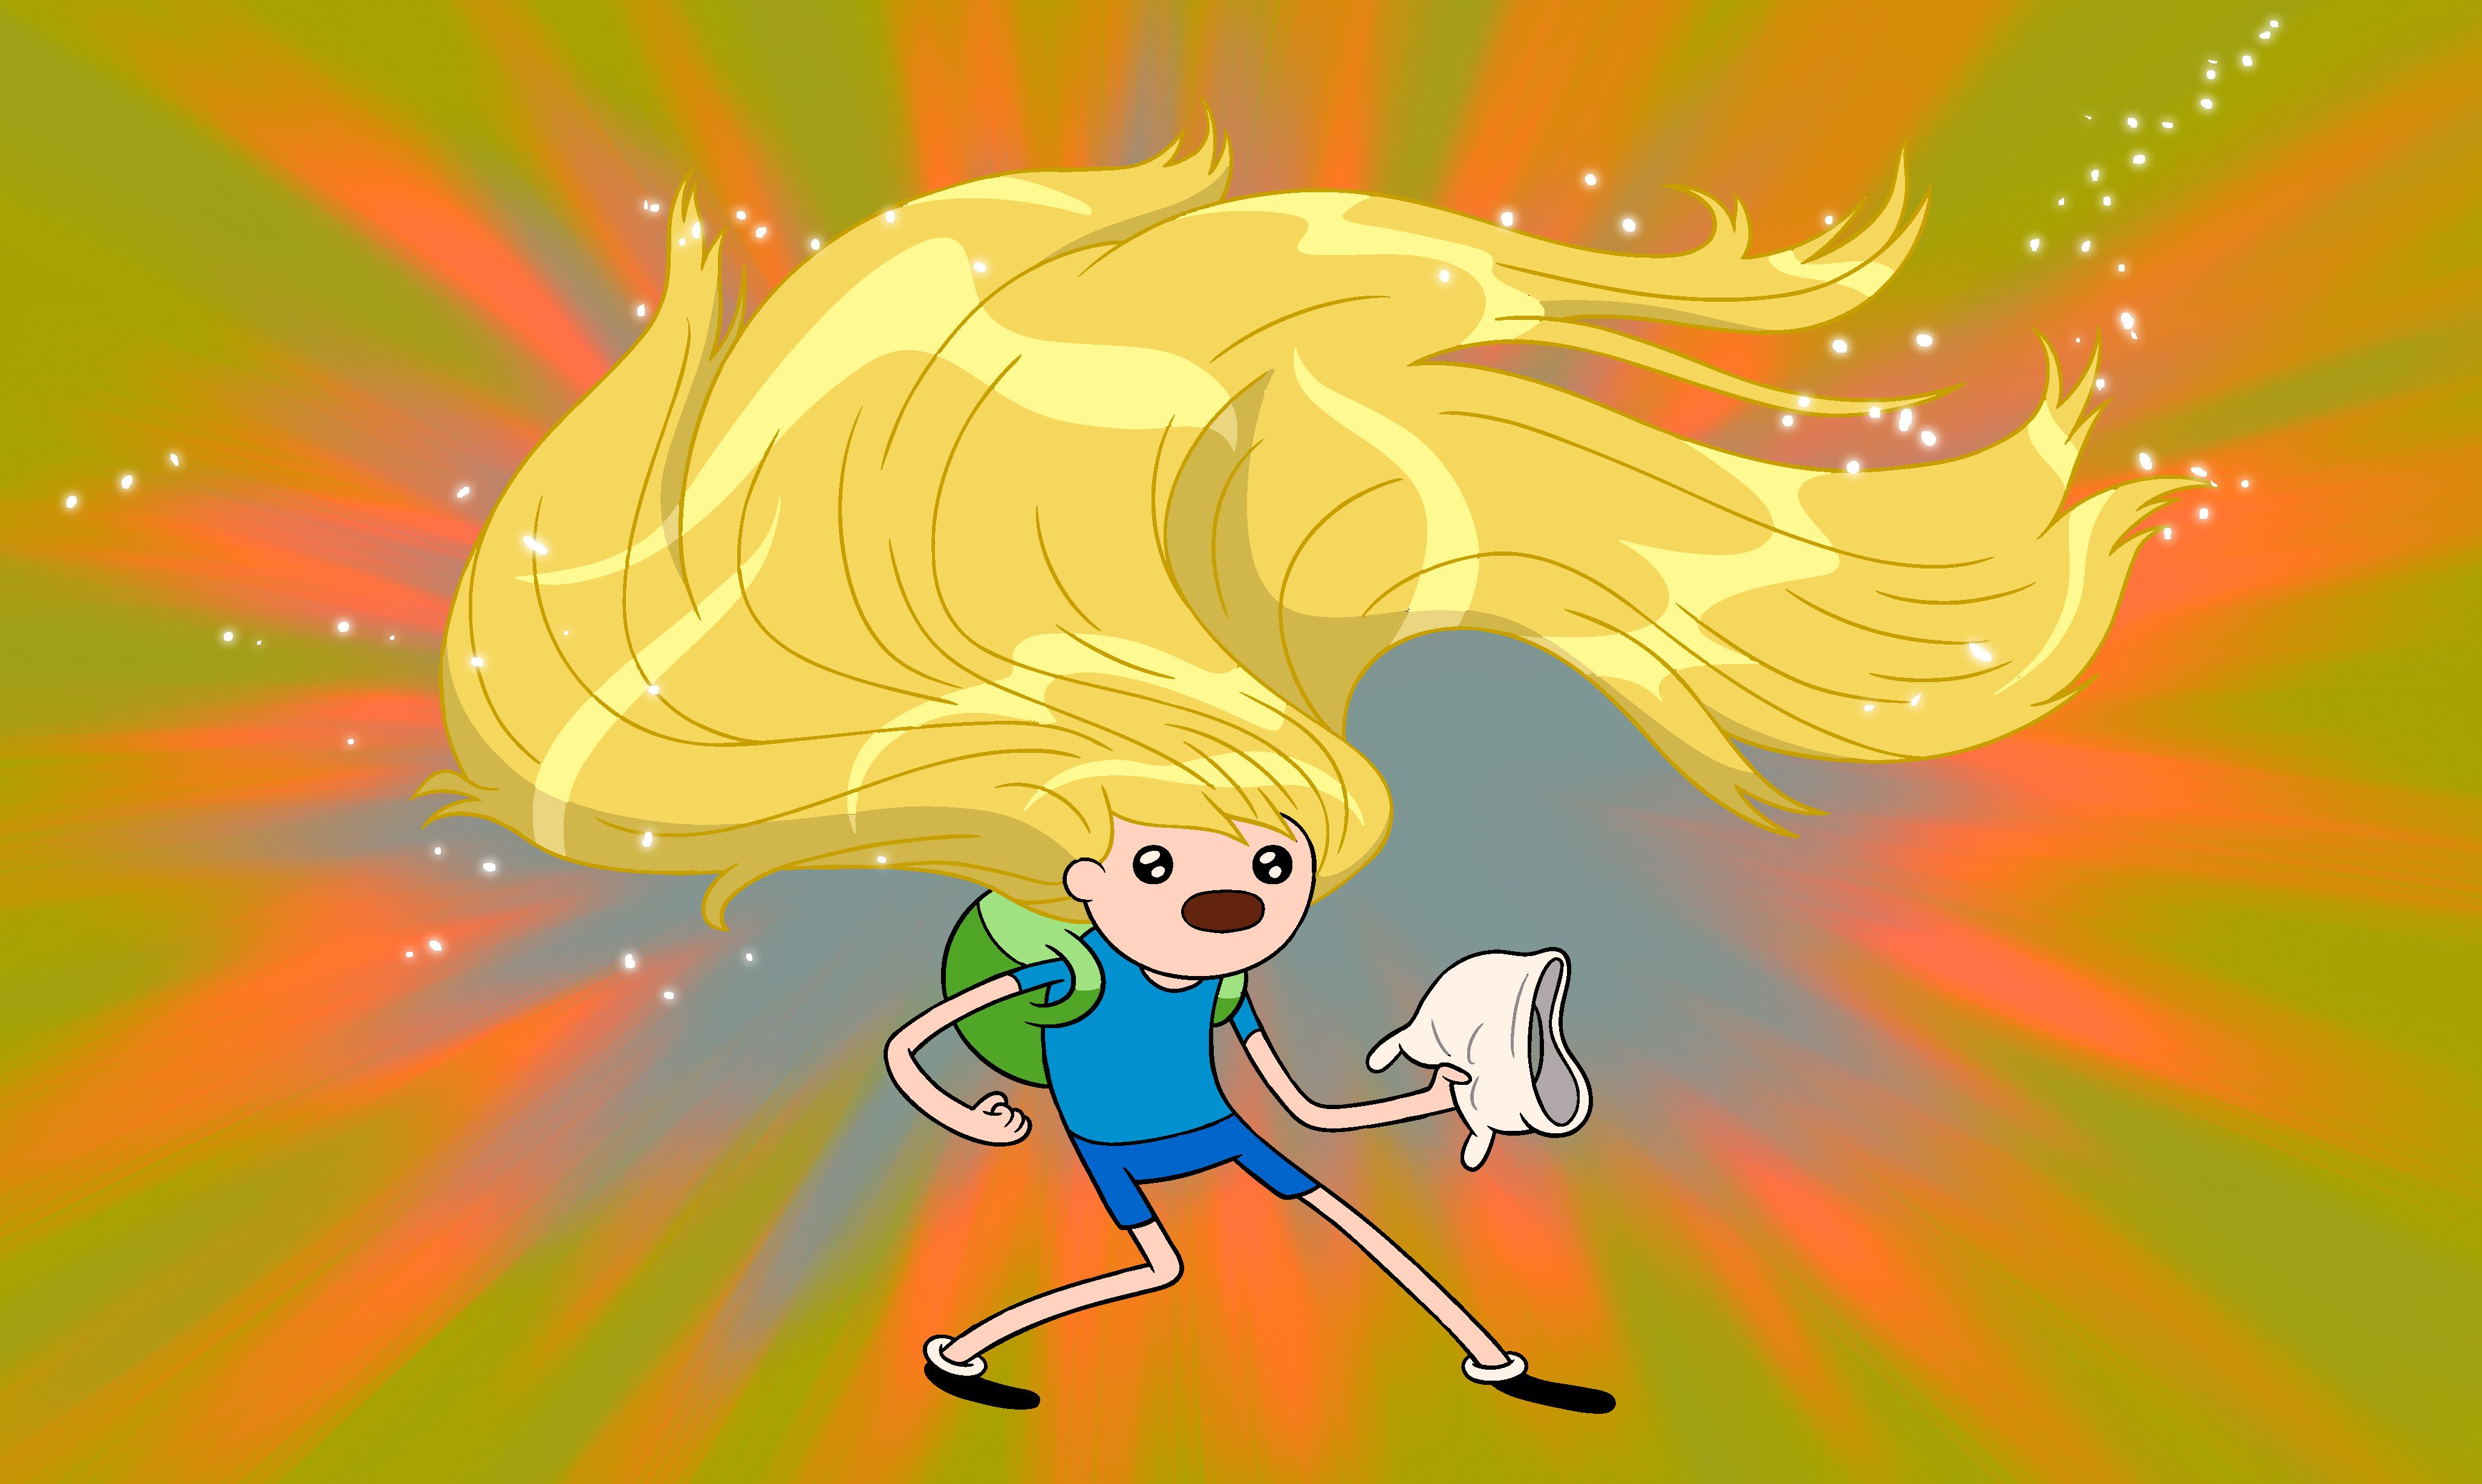 39 Adventure Time HD Wallpapers | Backgrounds - Wallpaper Abyss